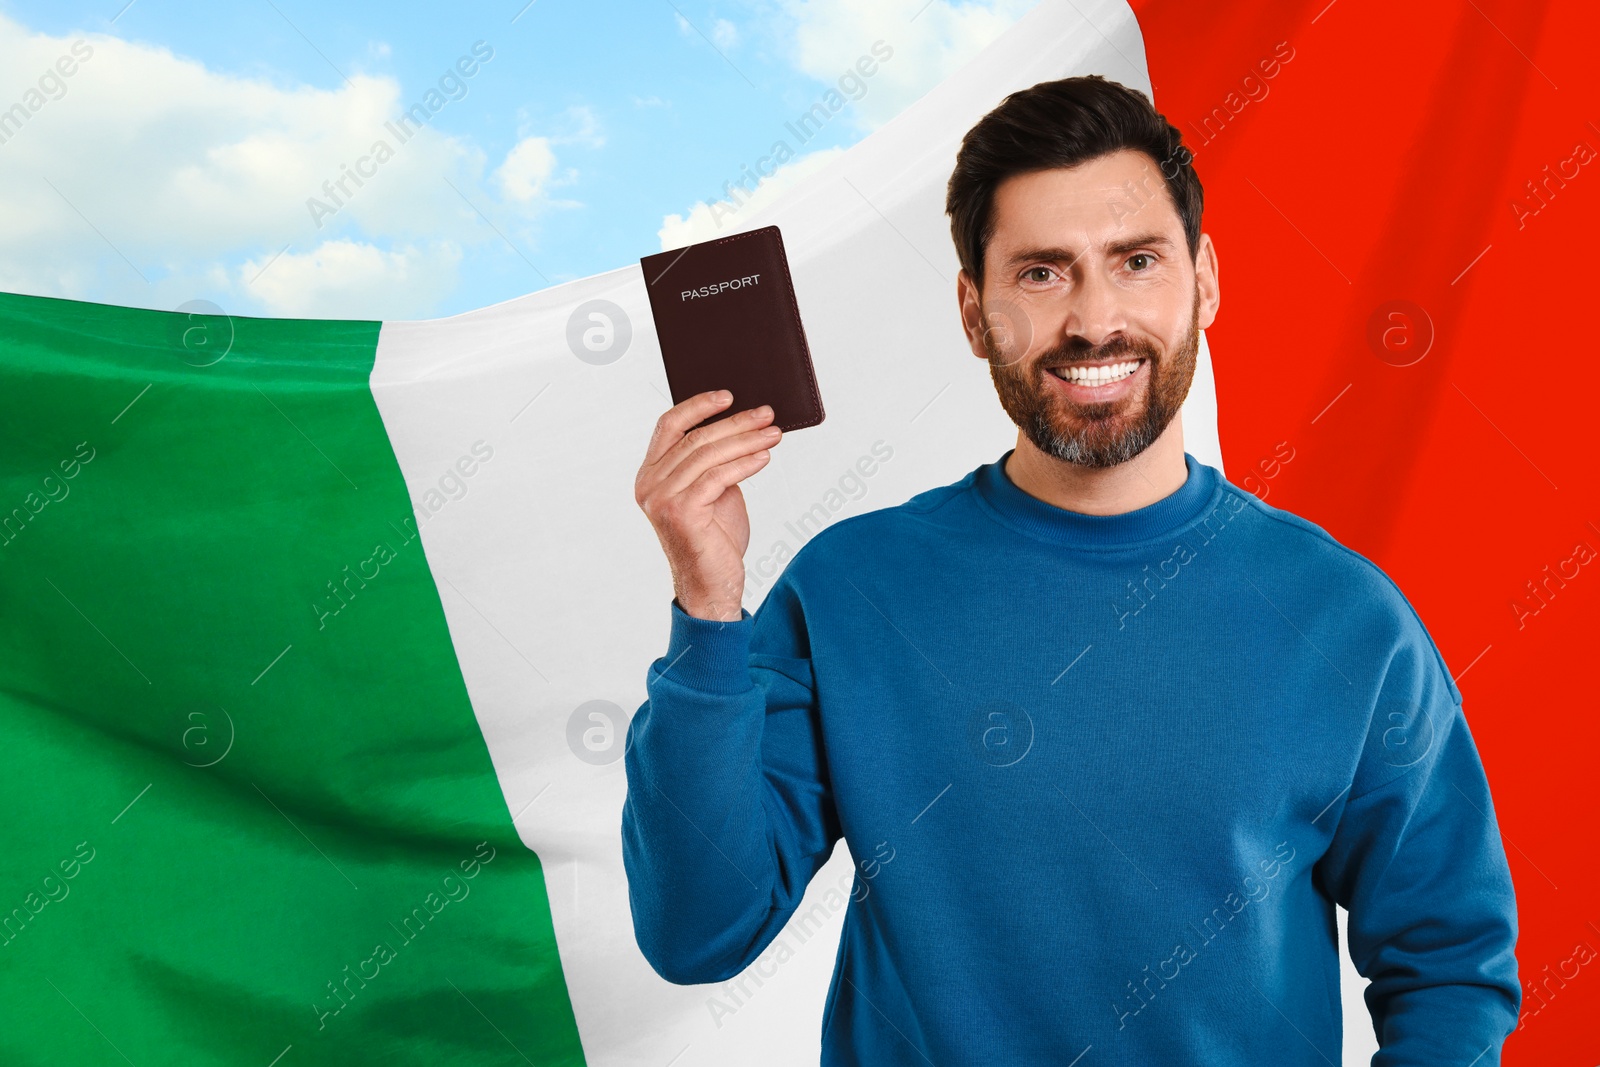 Image of Immigration. Happy man with passport and national flag of Italy against blue sky, space for text